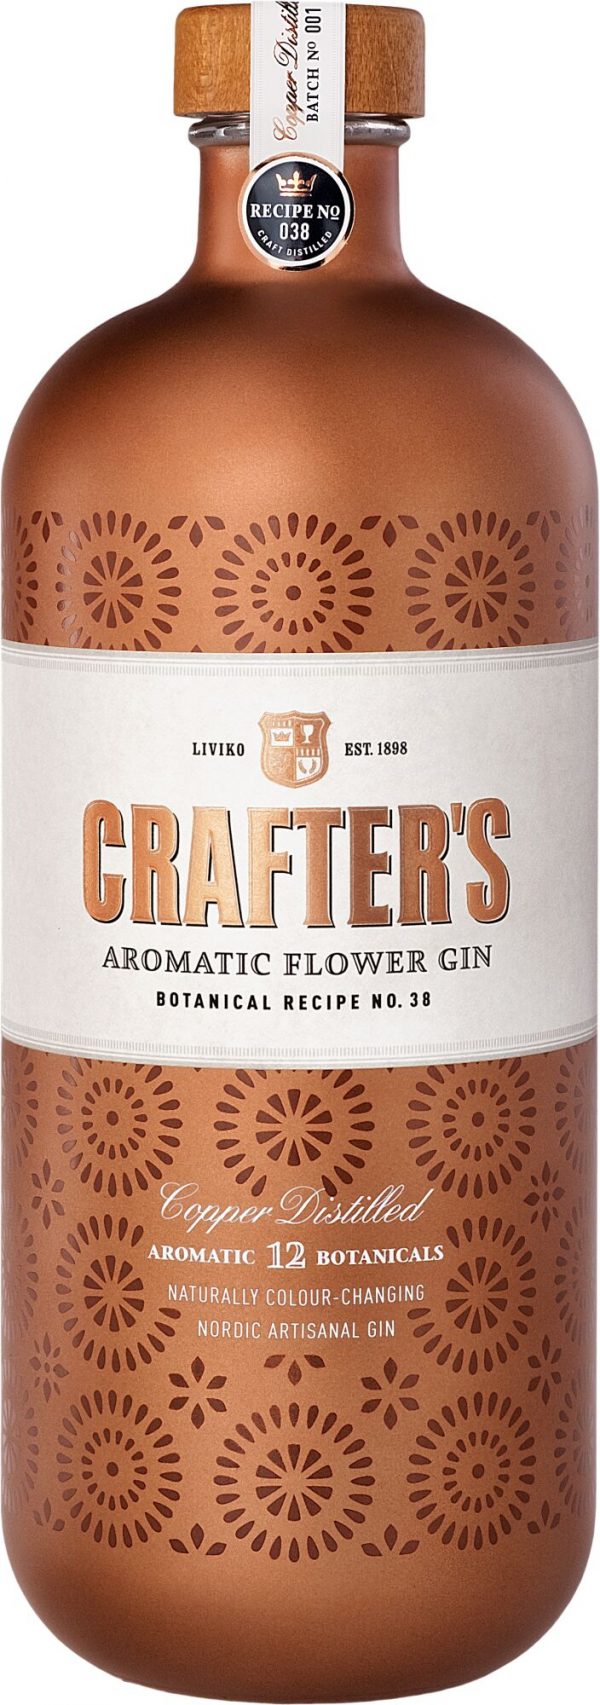 rafter's Aromatic Flower Gin 70cl